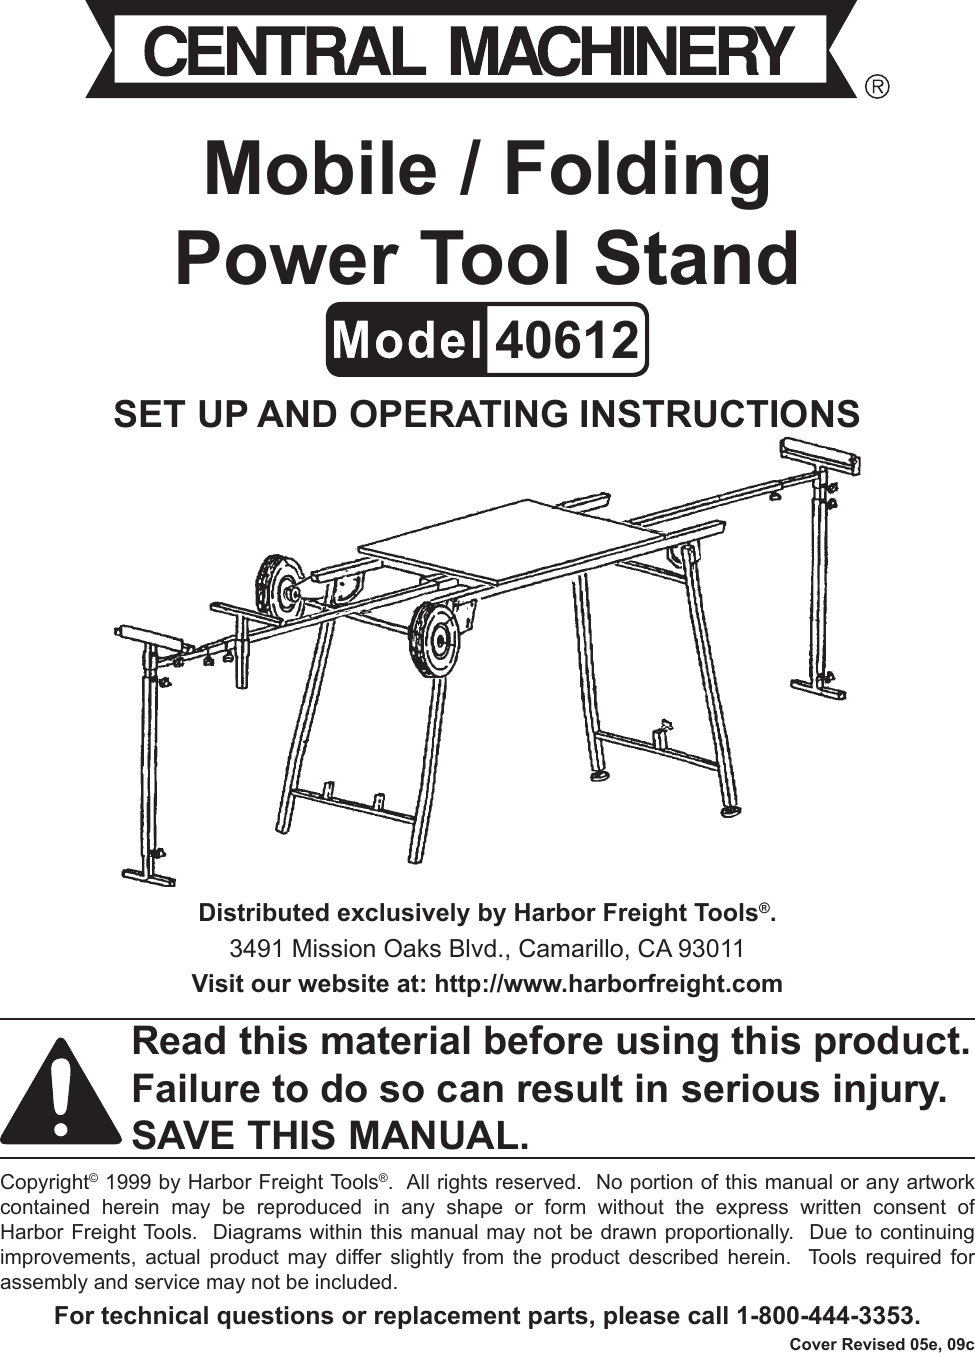 Page 1 of 5 - Harbor-Freight Harbor-Freight-Mobile-Folding-Power-Tool-Stand-Product-Manual-  Harbor-freight-mobile-folding-power-tool-stand-product-manual